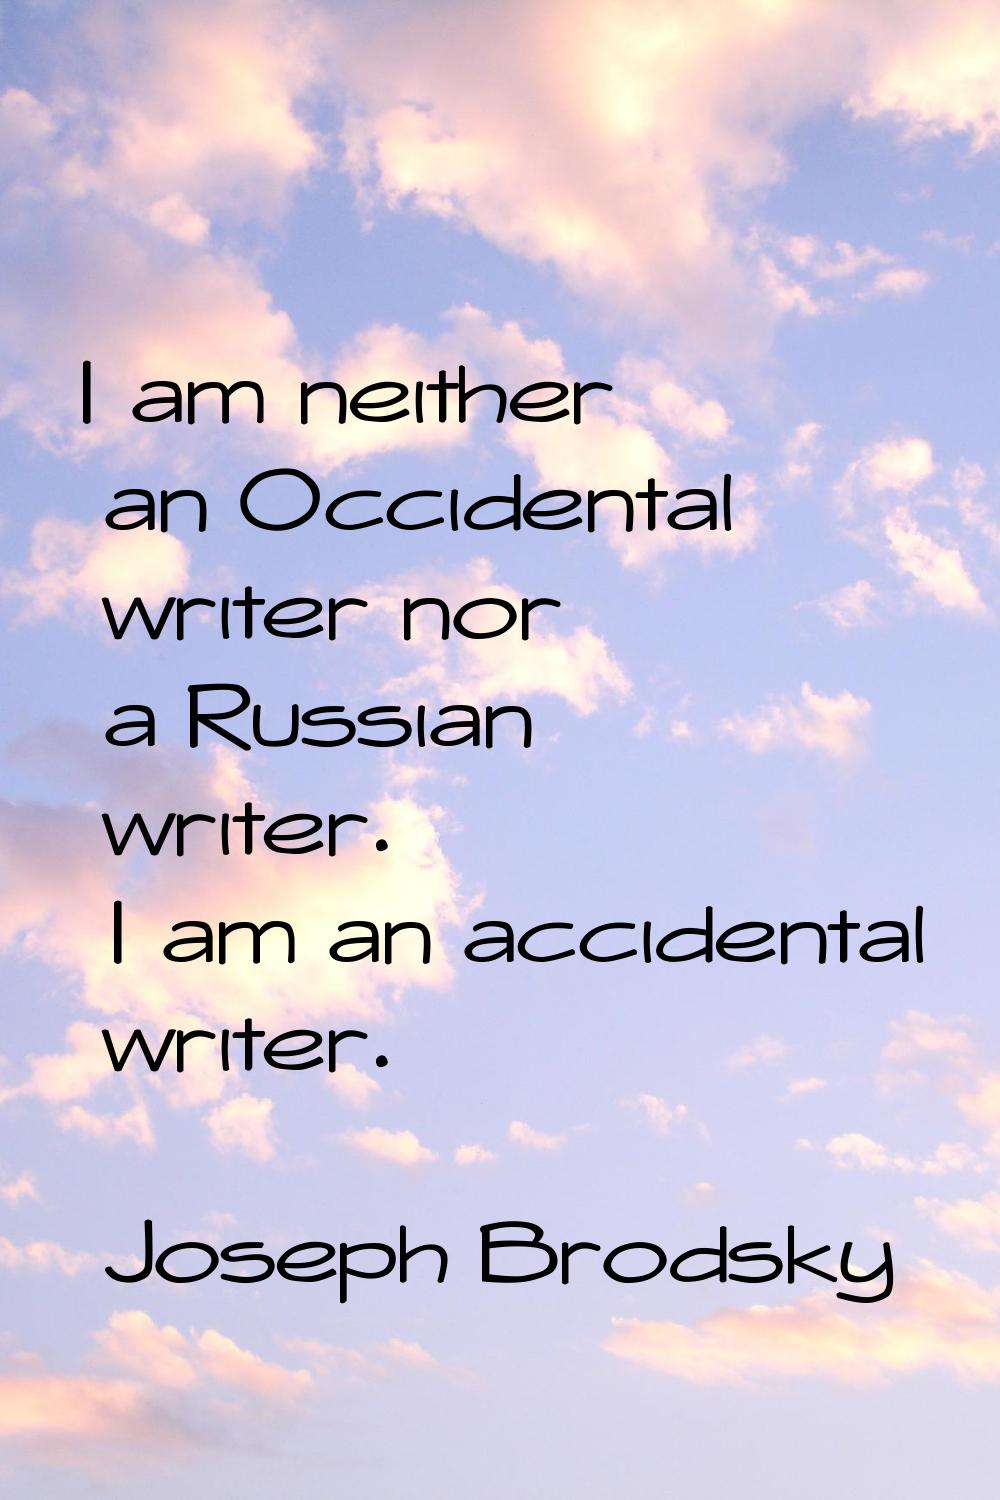 I am neither an Occidental writer nor a Russian writer. I am an accidental writer.